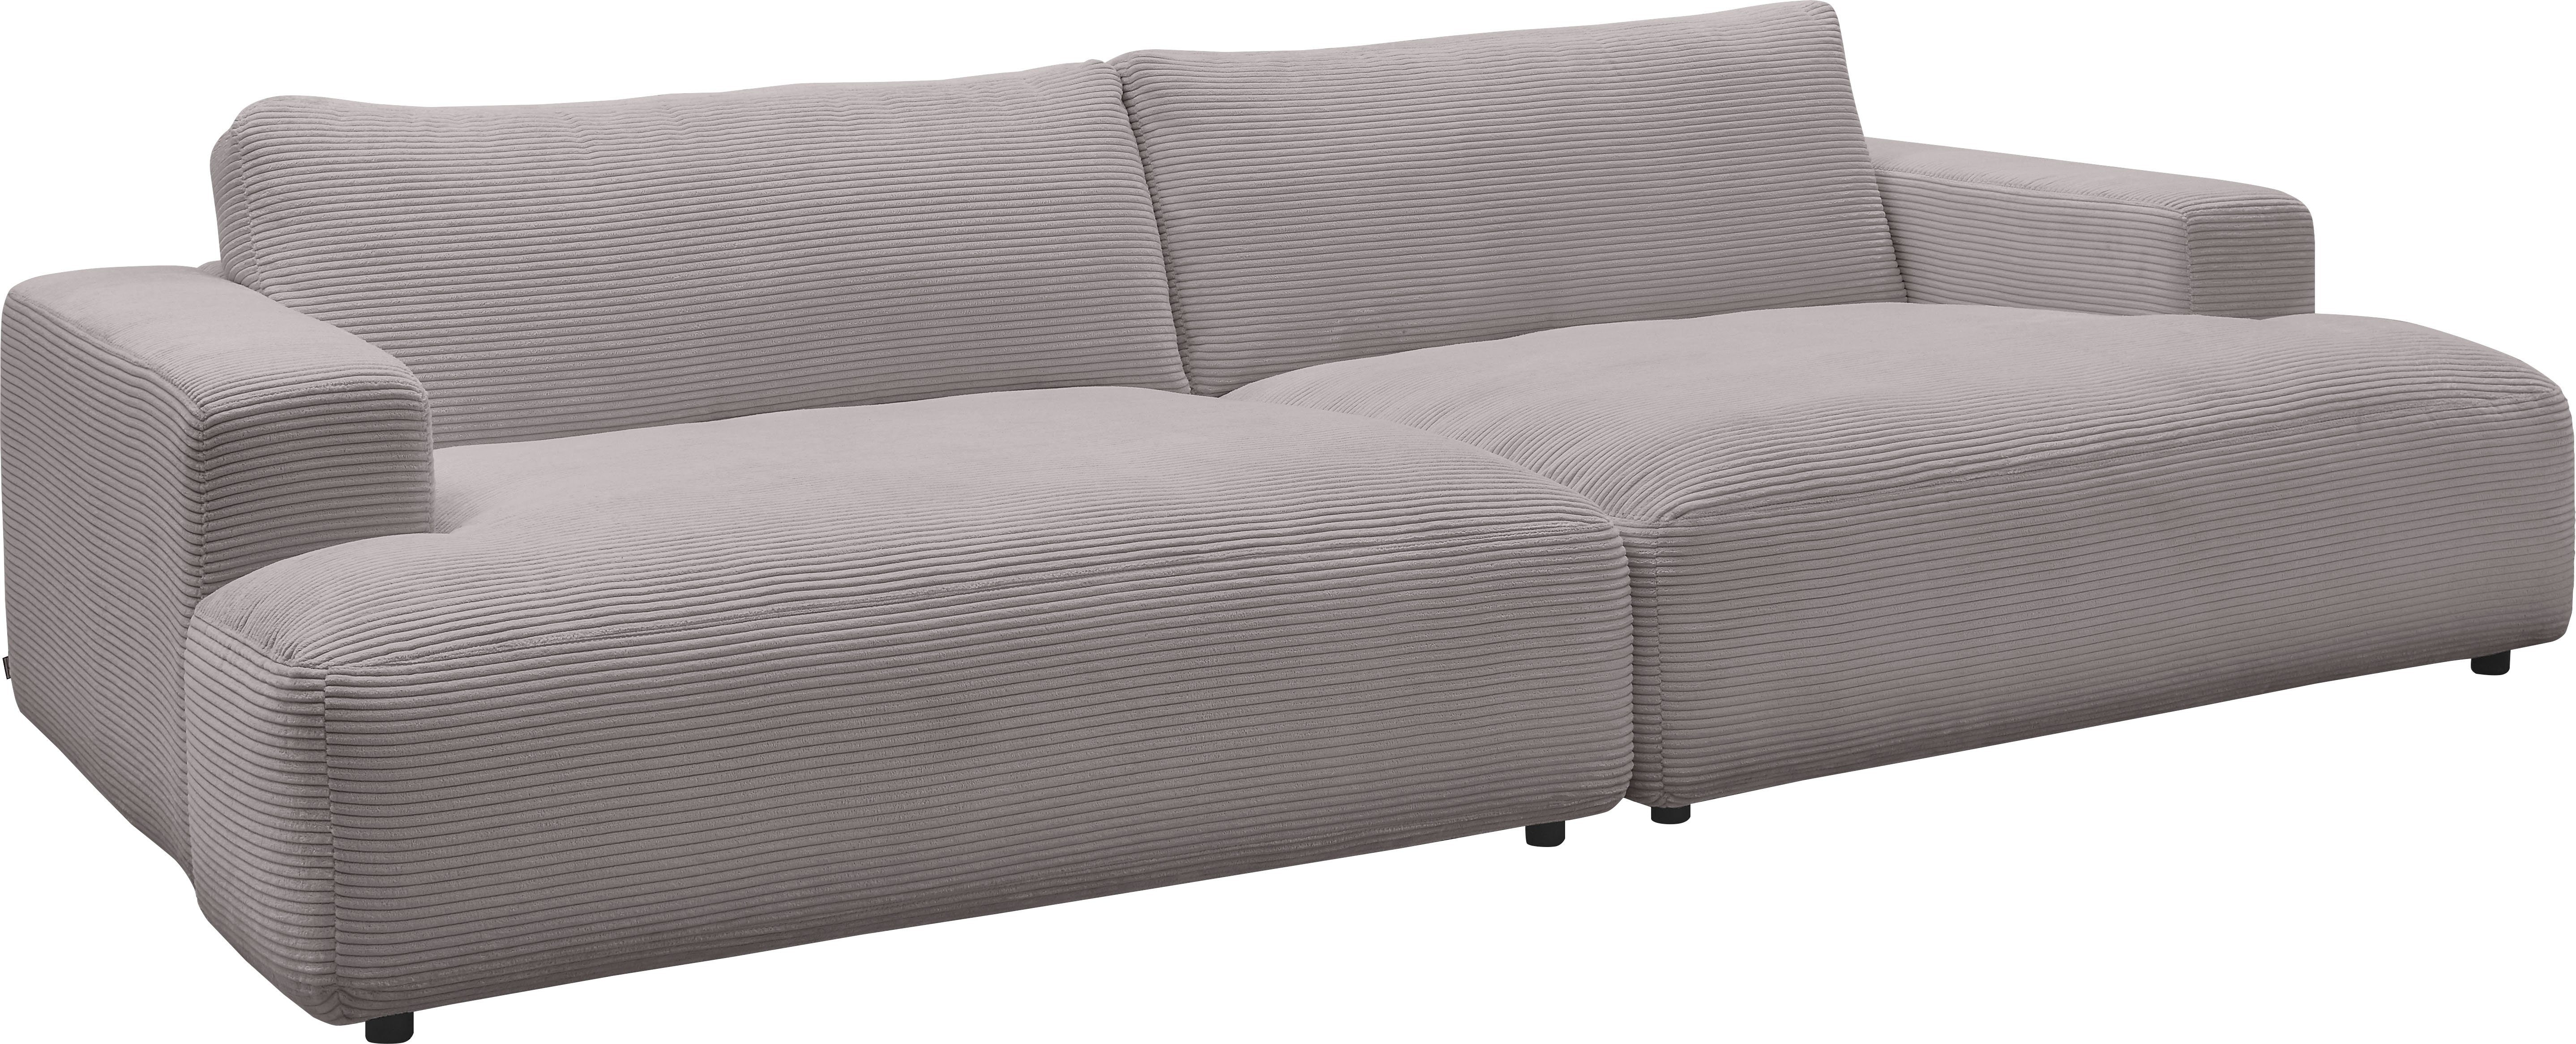 Musterring cm by M Lucia, Cord-Bezug, 292 Loungesofa GALLERY Breite branded grey